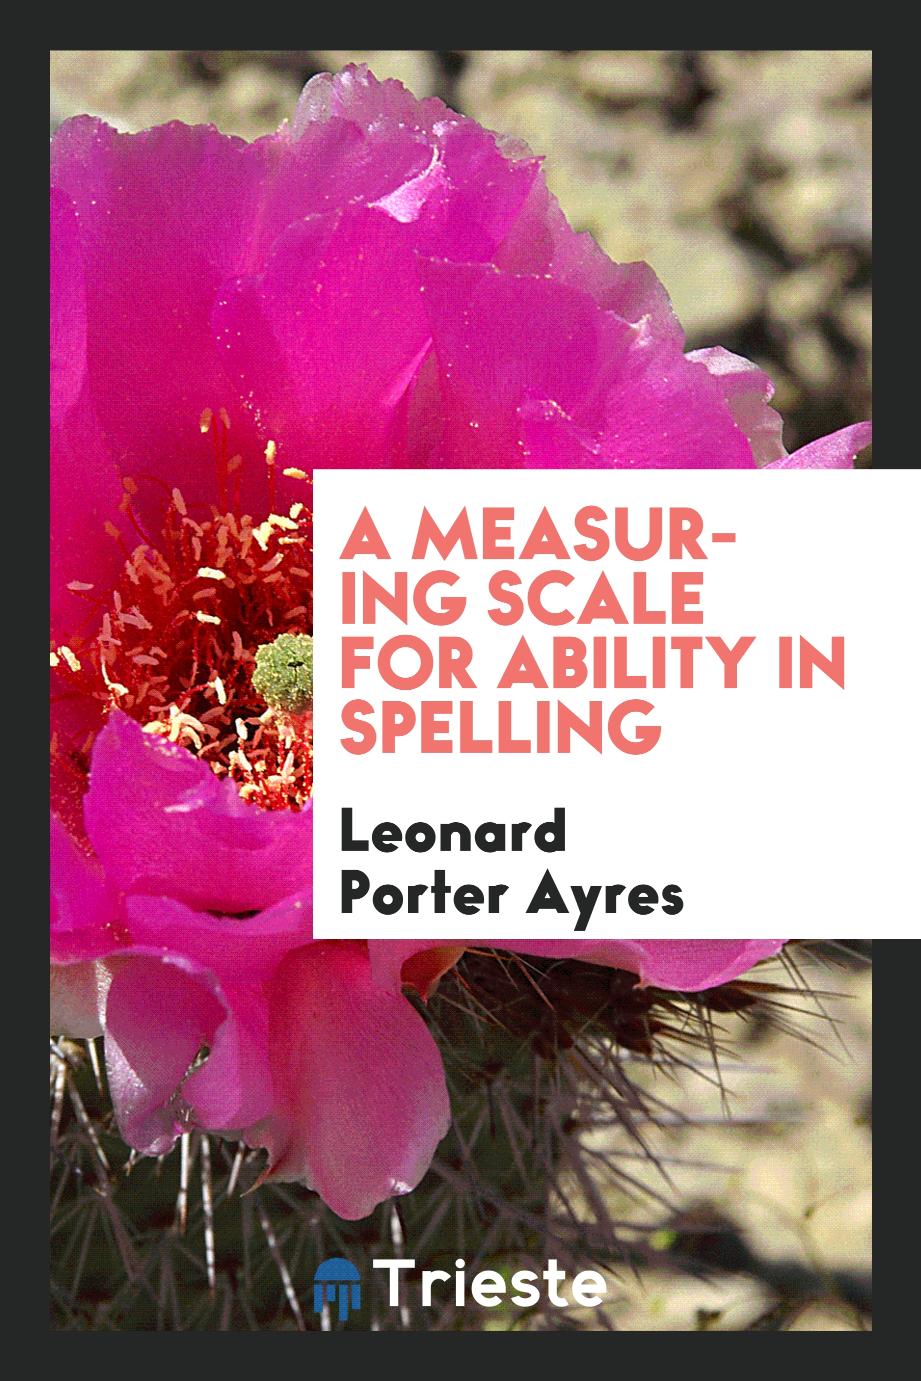 A measuring scale for ability in spelling